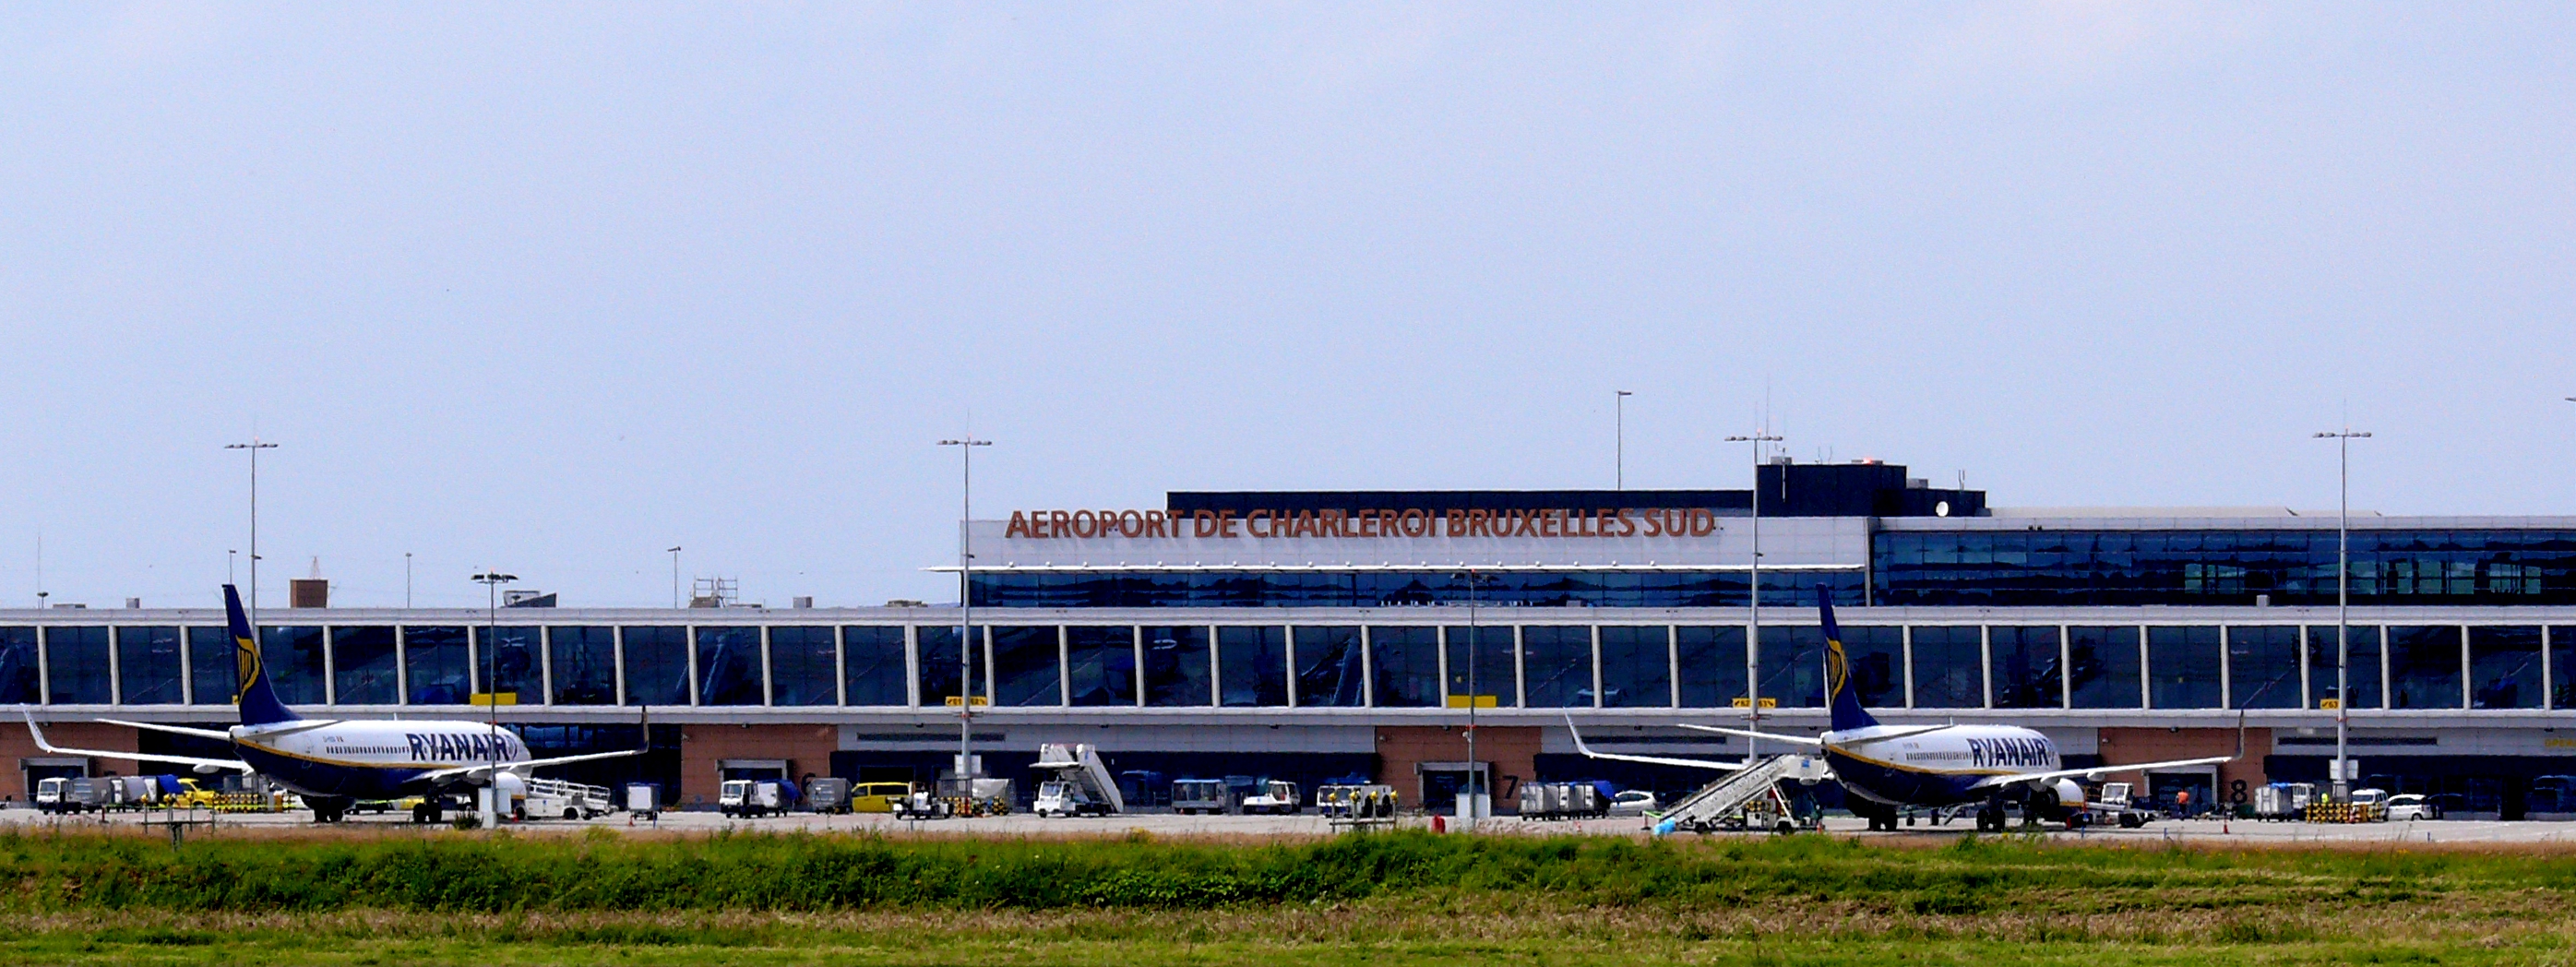 Brussels South Charleroi Airport.